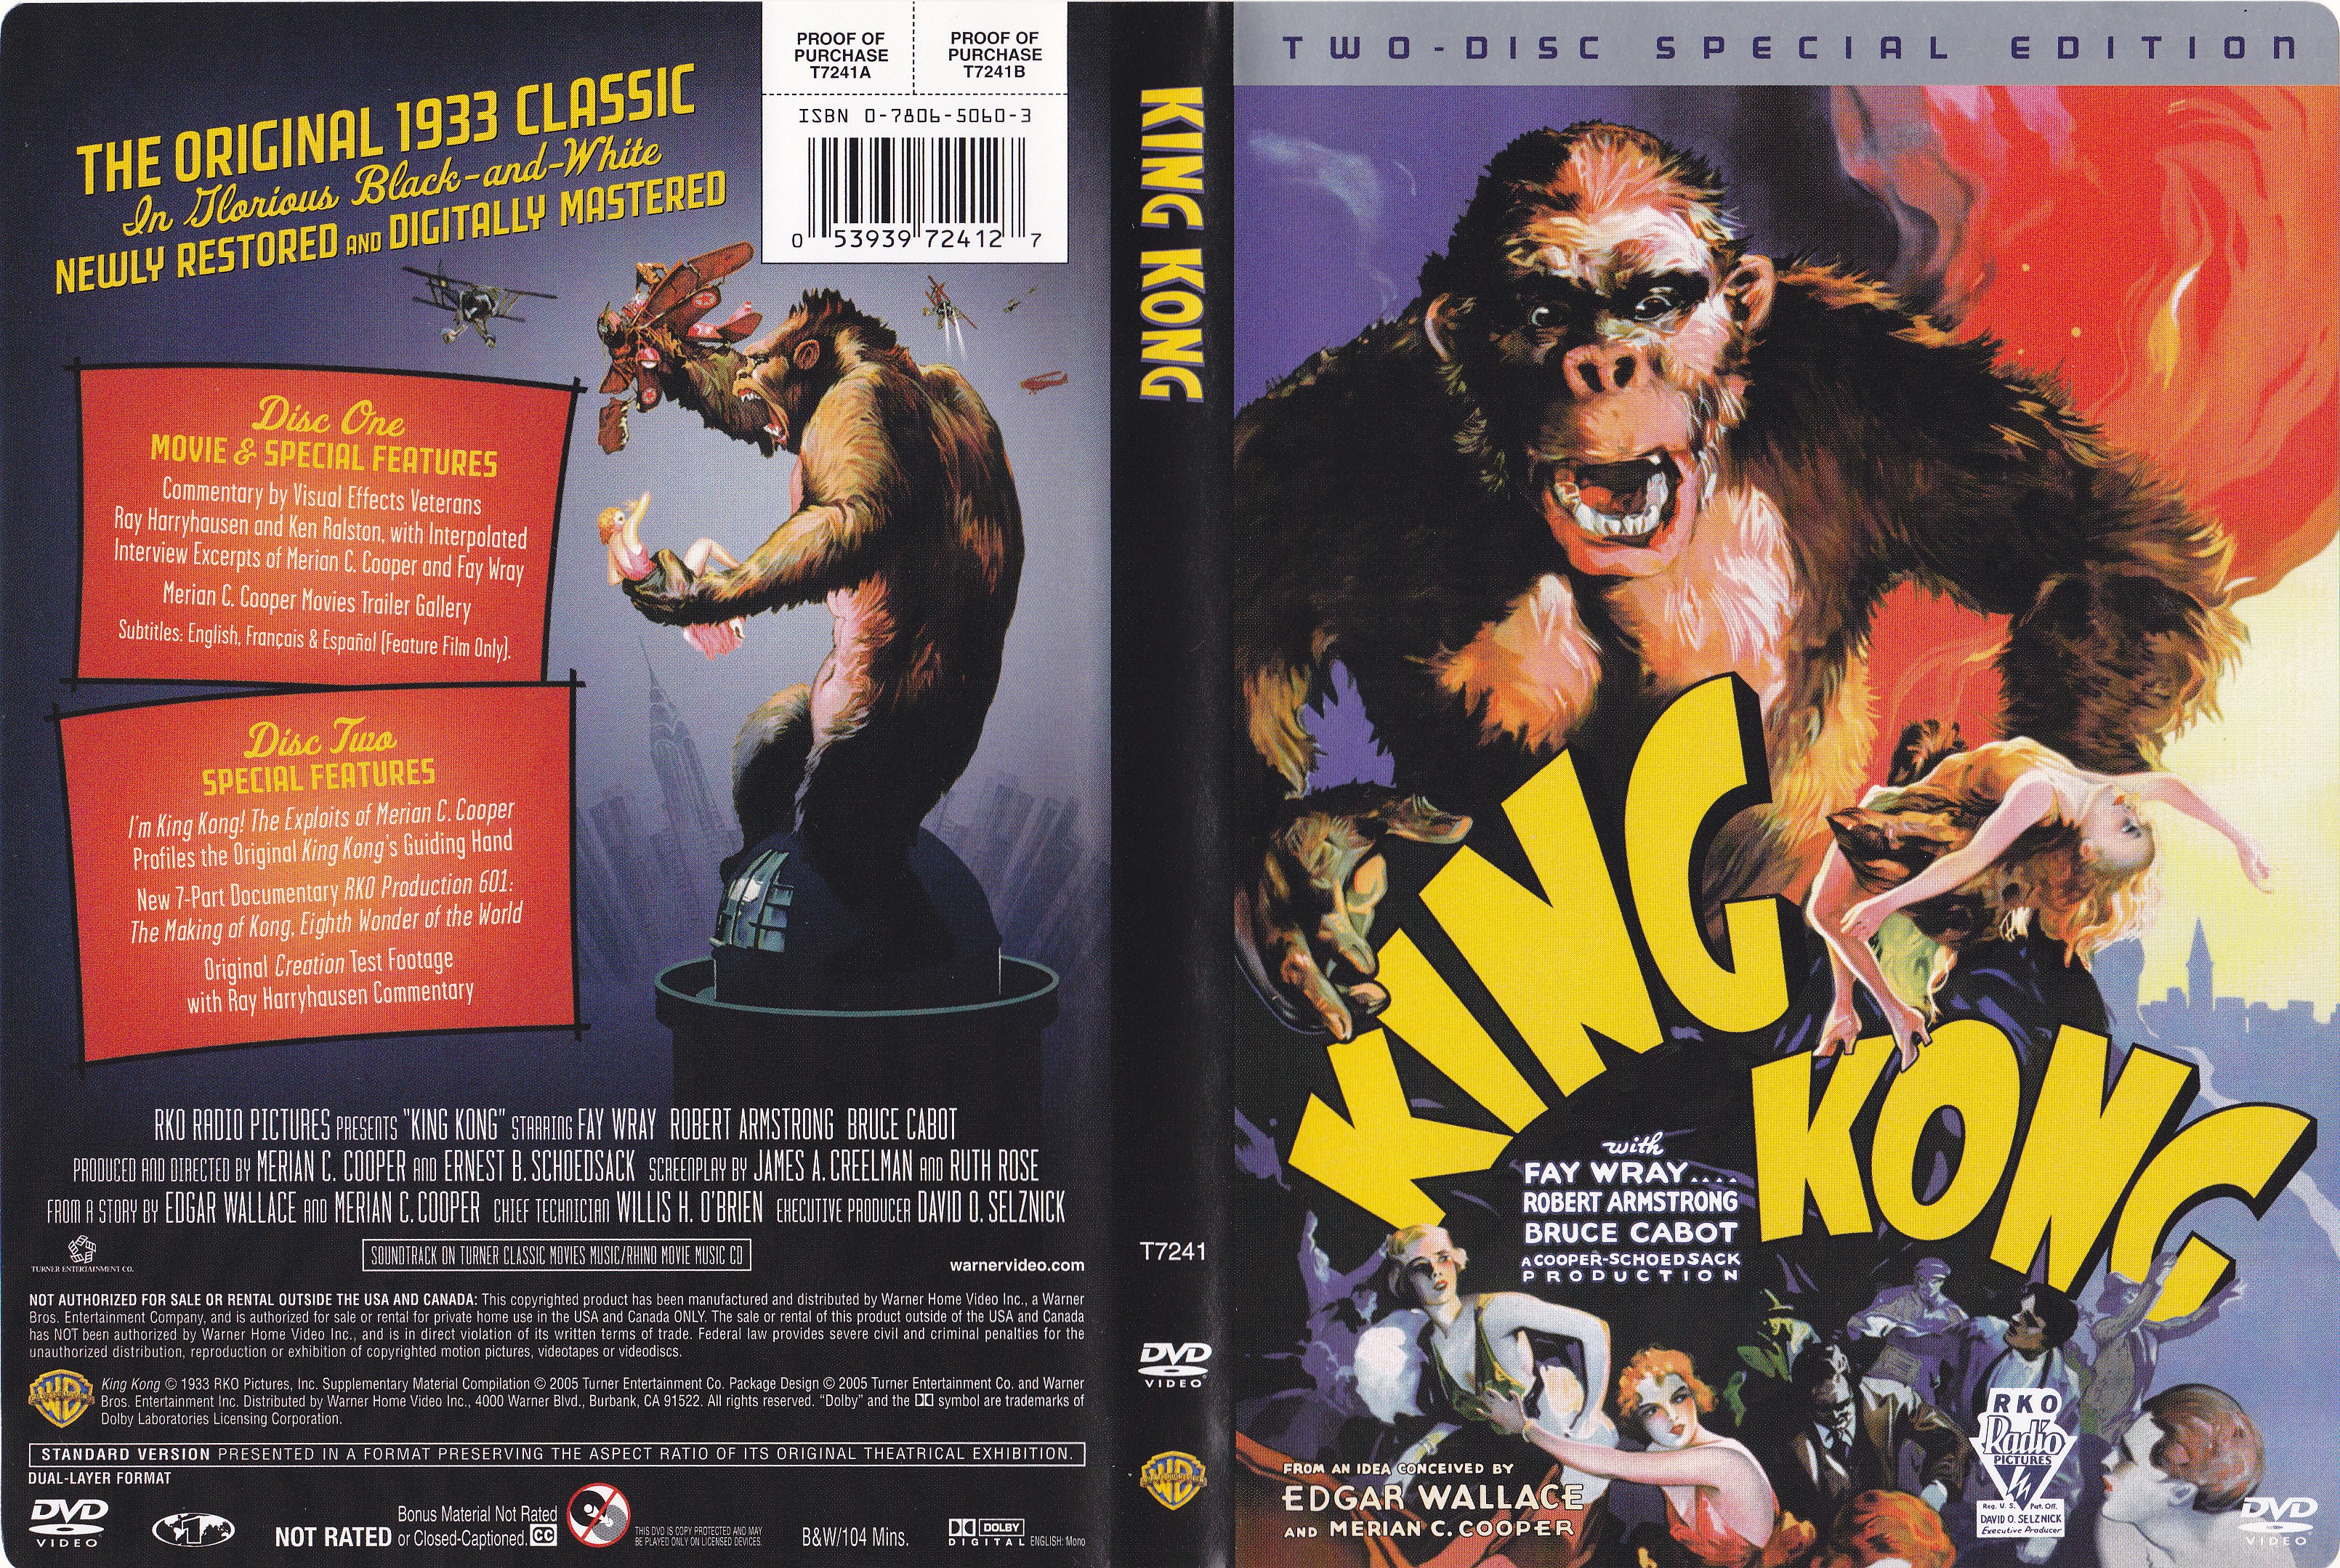 Jaquette DVD King Kong (1933) Zone 1 v2